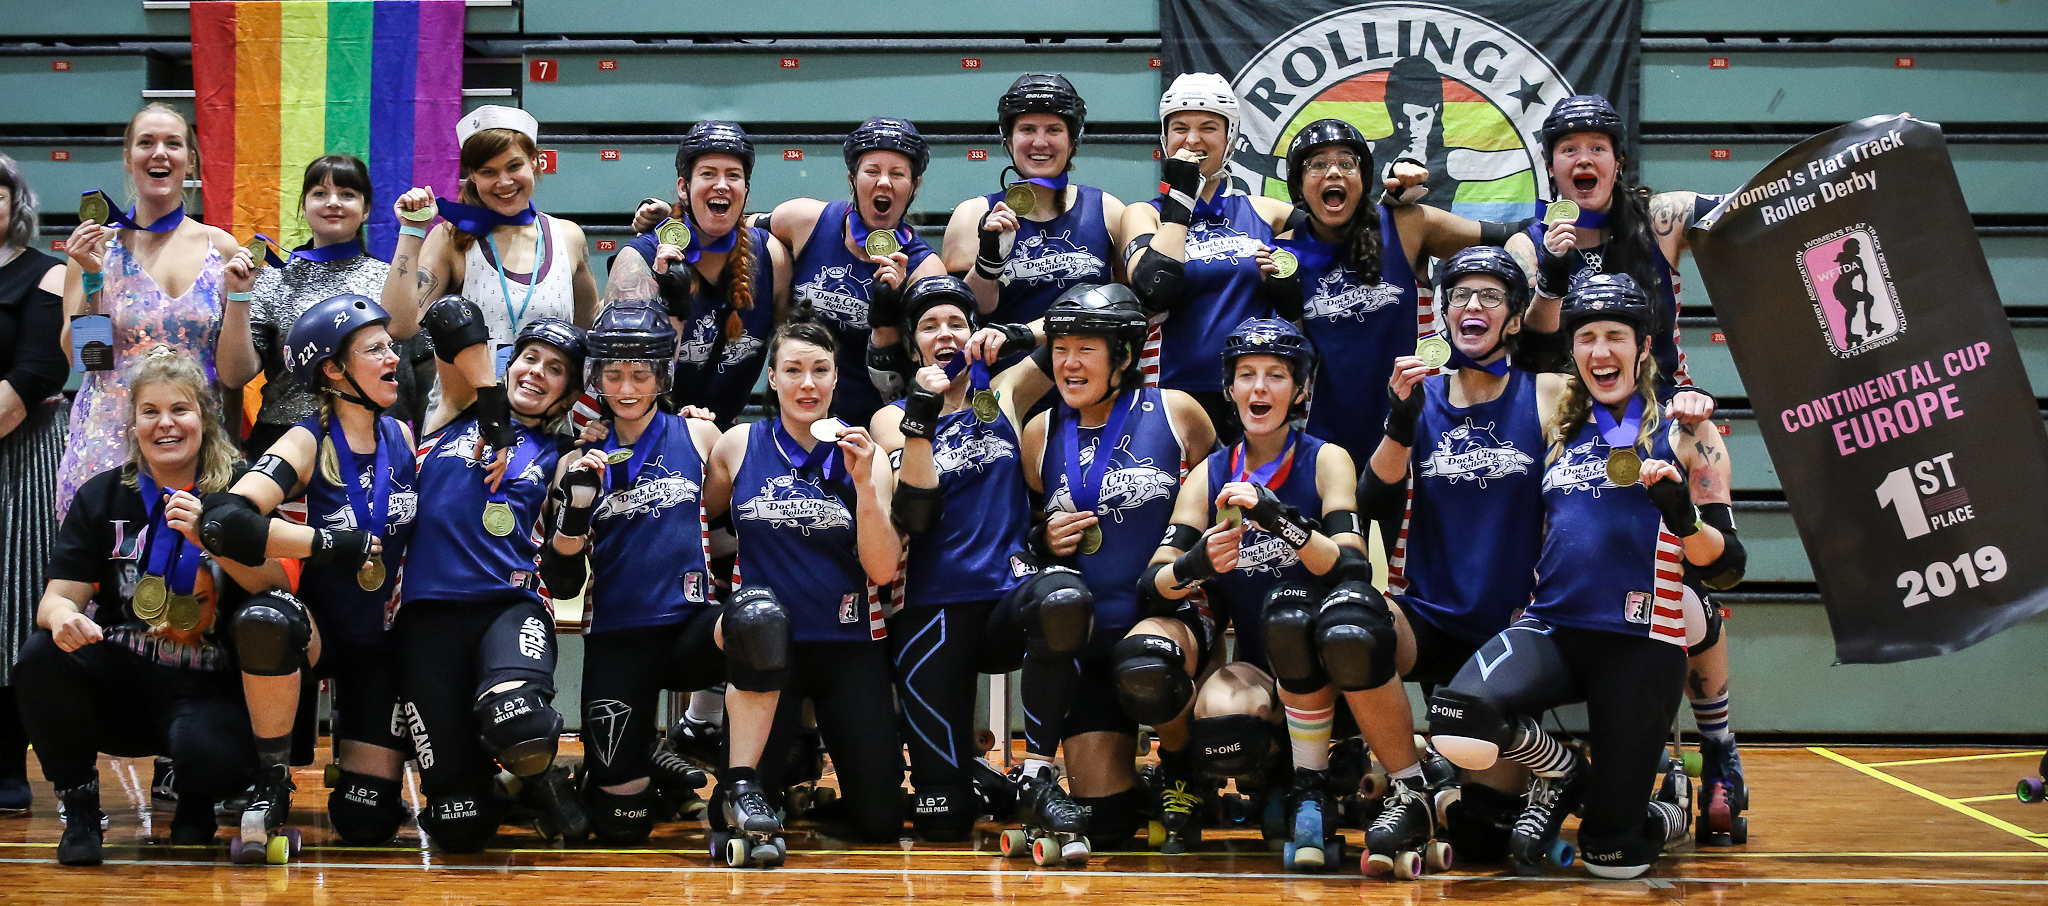 Dock City Rollers - Winners of 2019 WFTDA Continental Cup - Europe